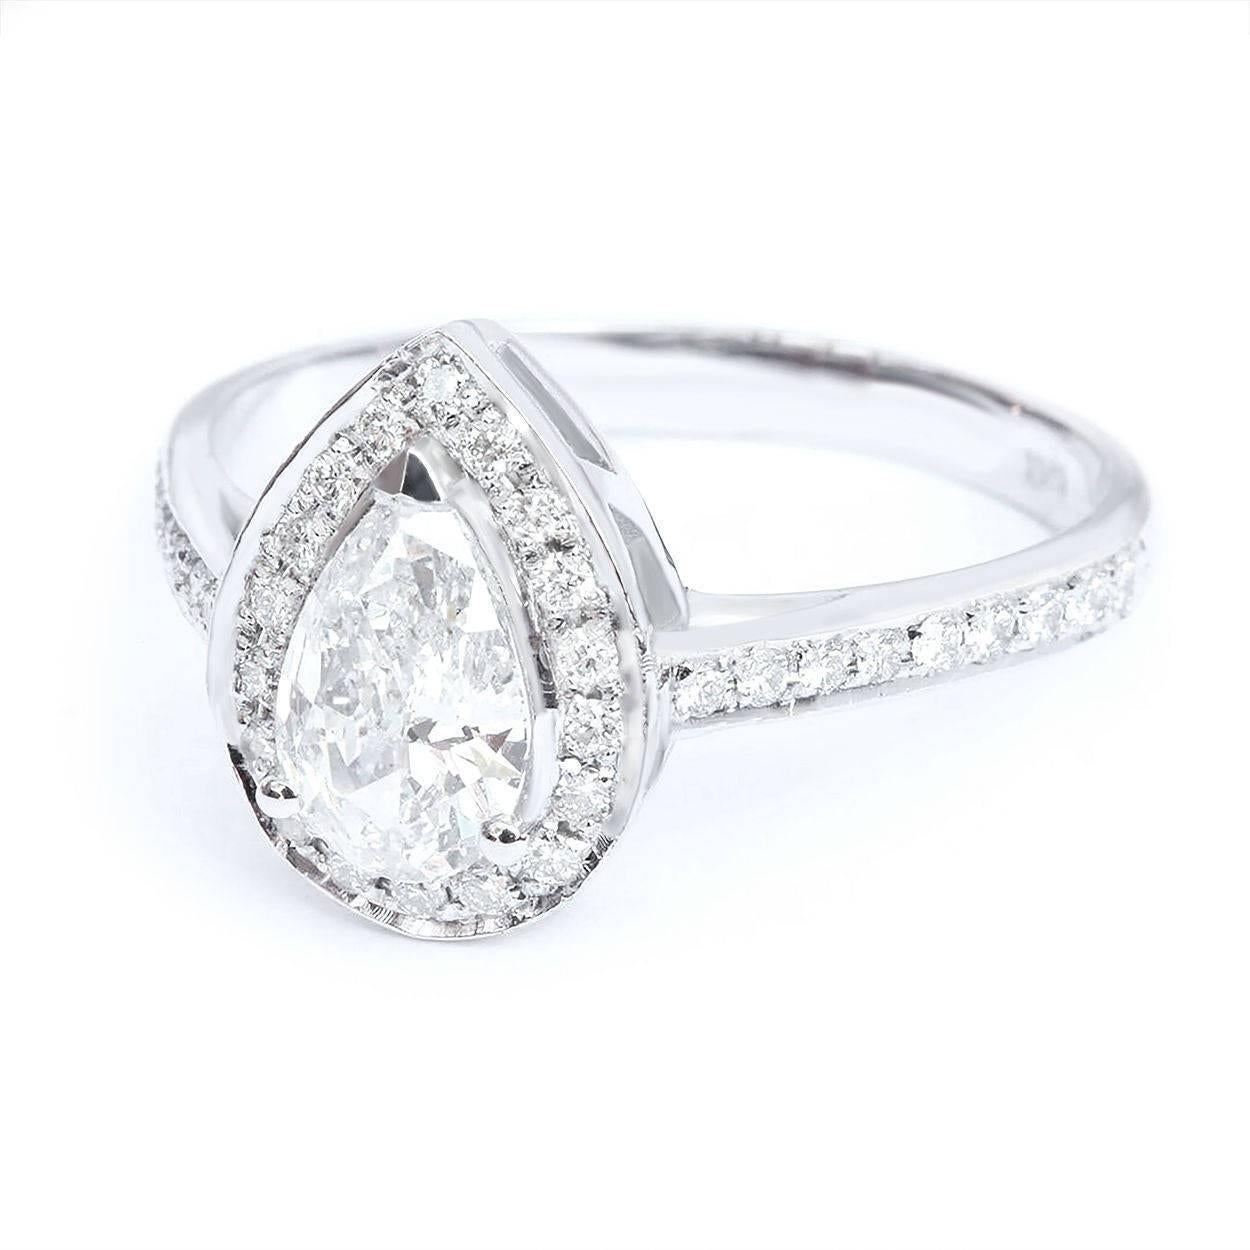 Contemporary Pear Diamond Halo Engagement Ring With Diamond Ring Guard 